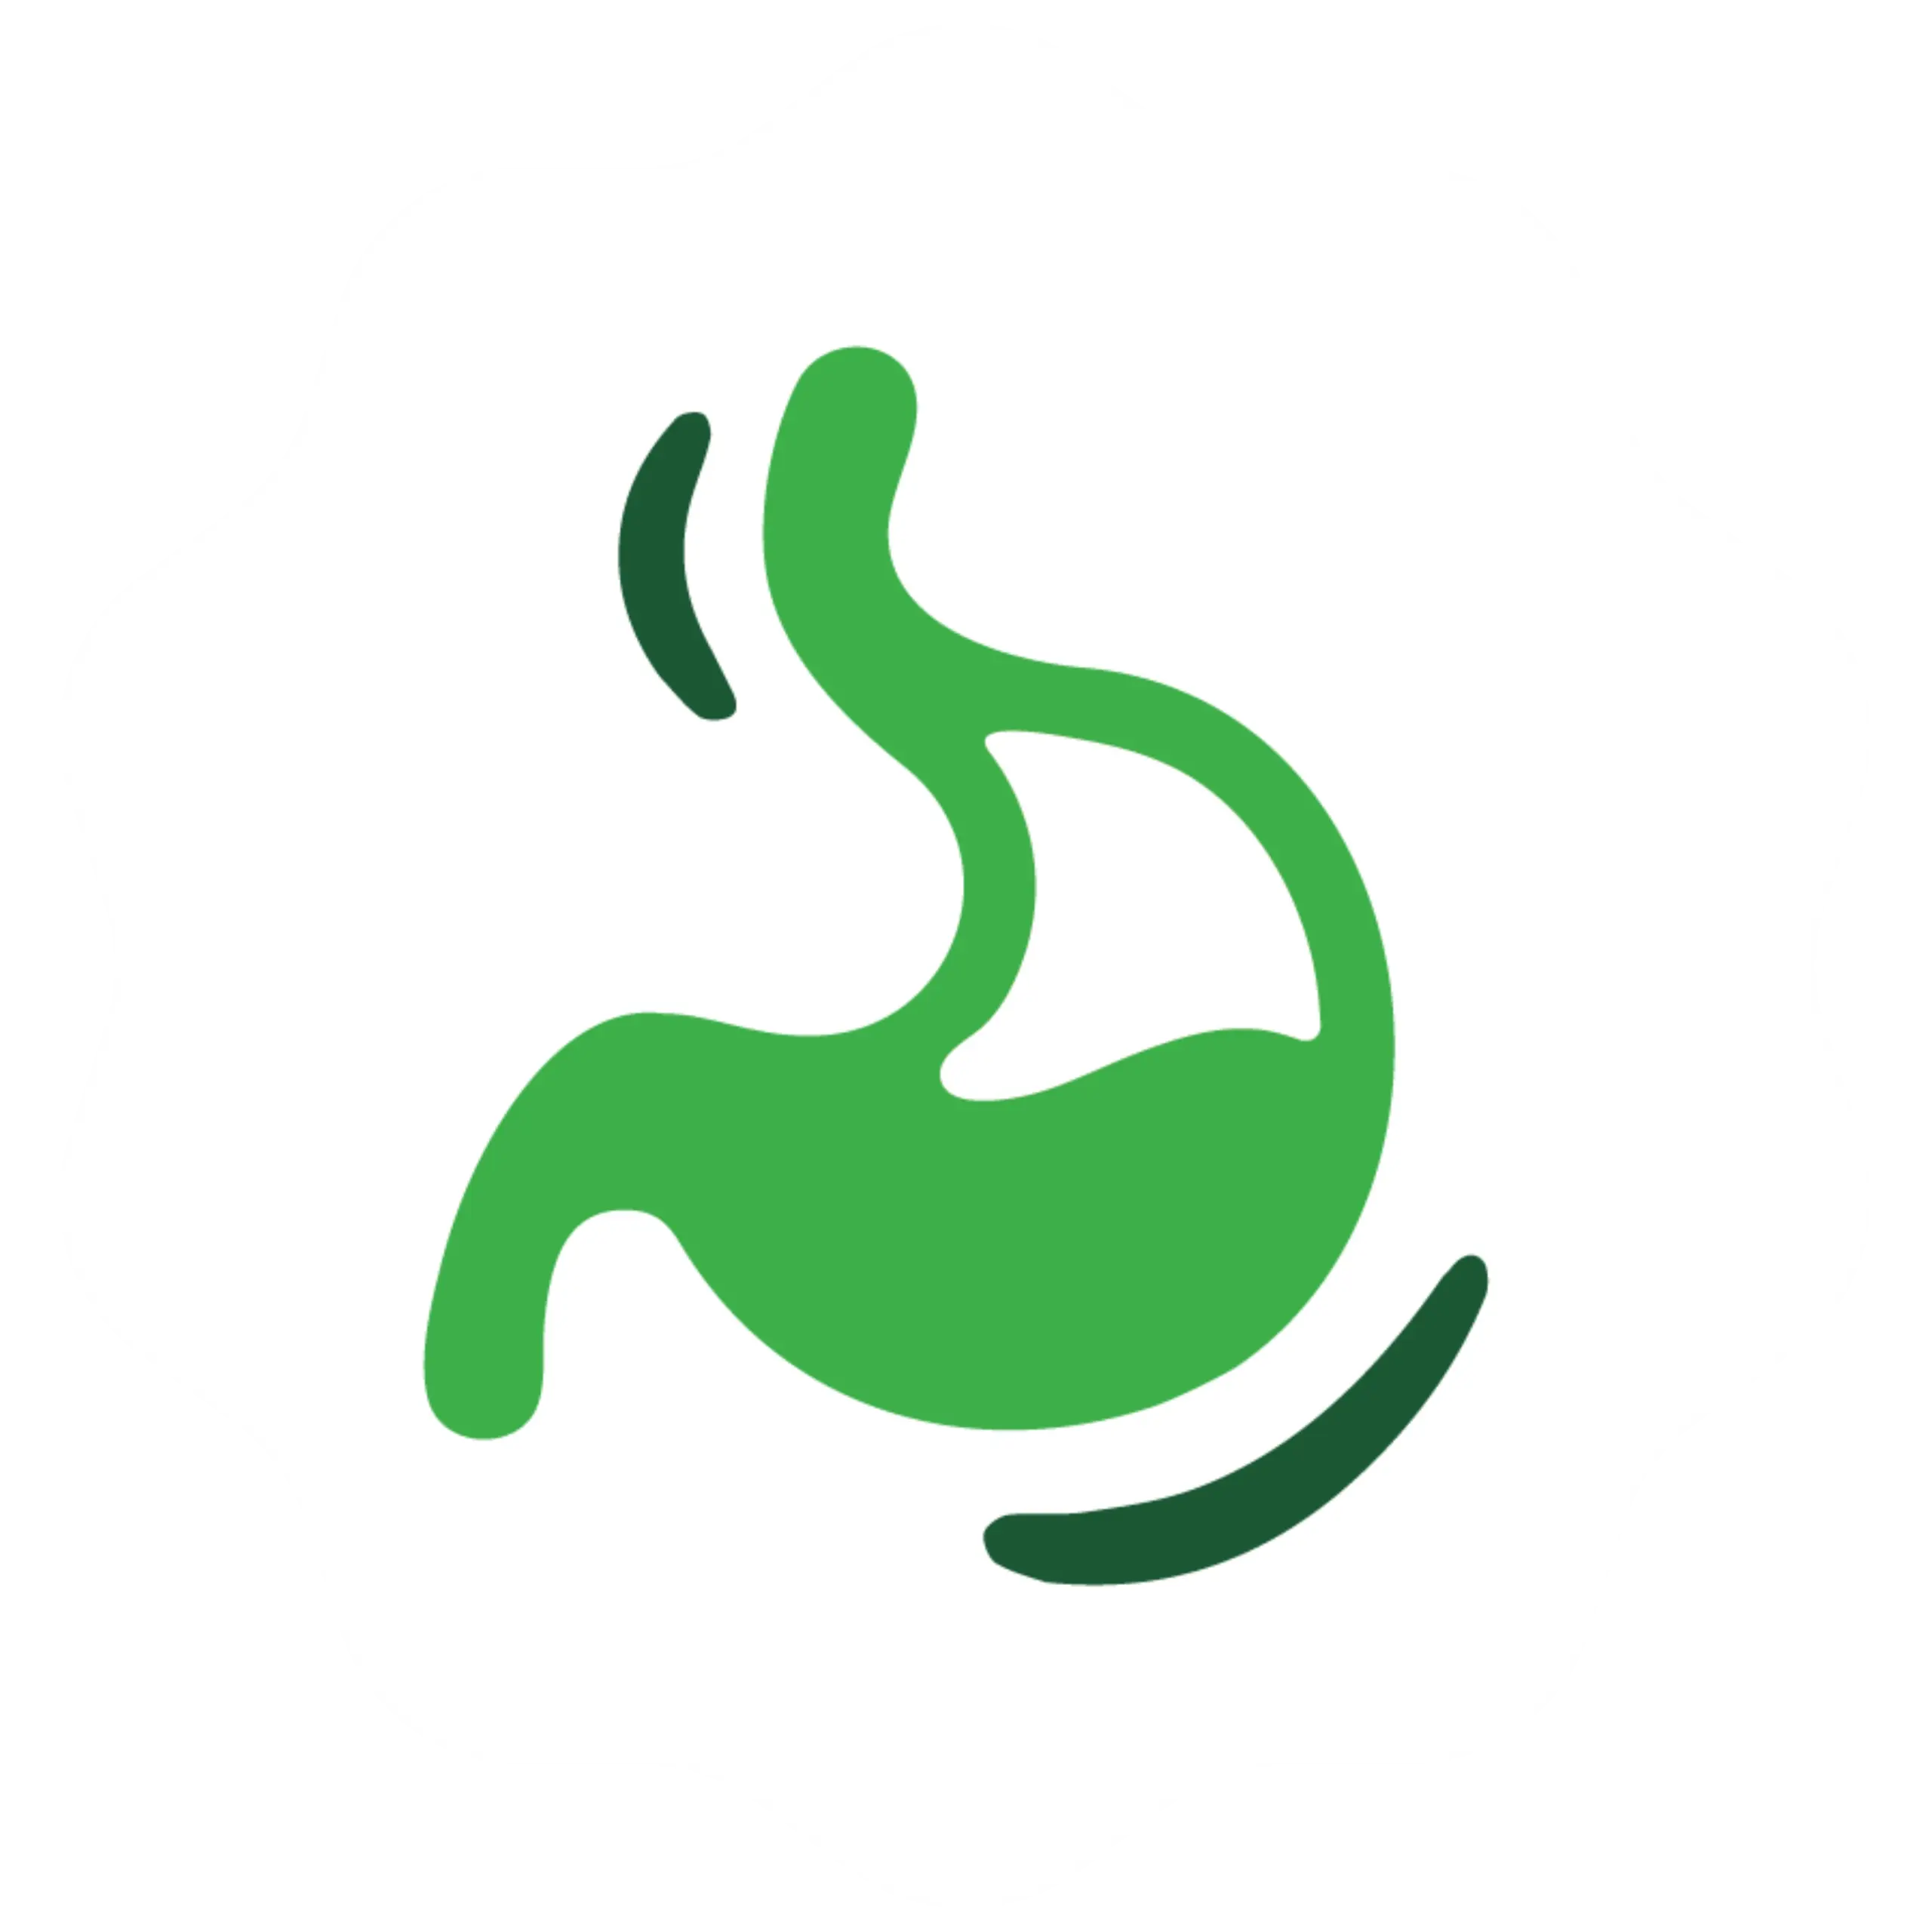  Green and white heart logo